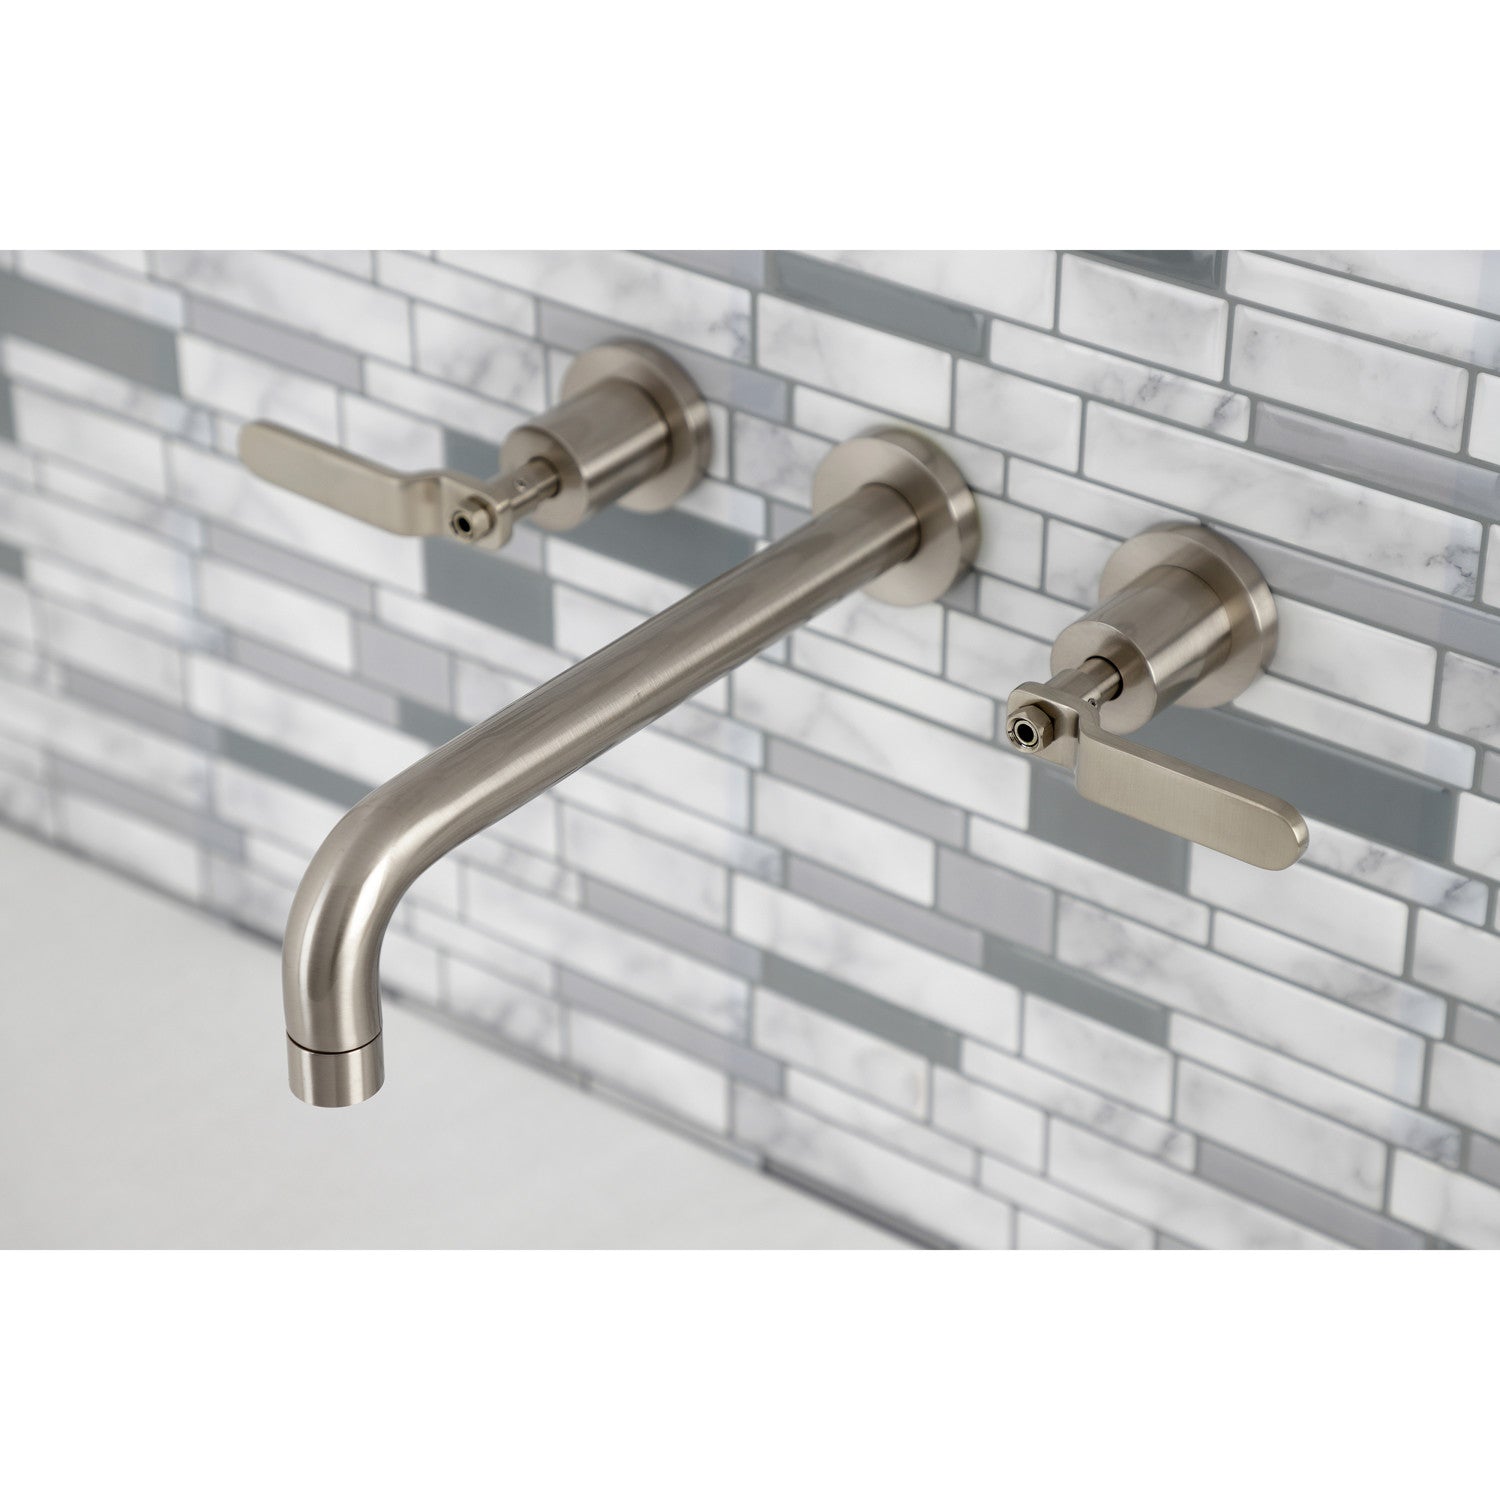 Whitaker KS8028KL Two-Handle 3-Hole Wall Mount Roman Tub Faucet, Brushed Nickel